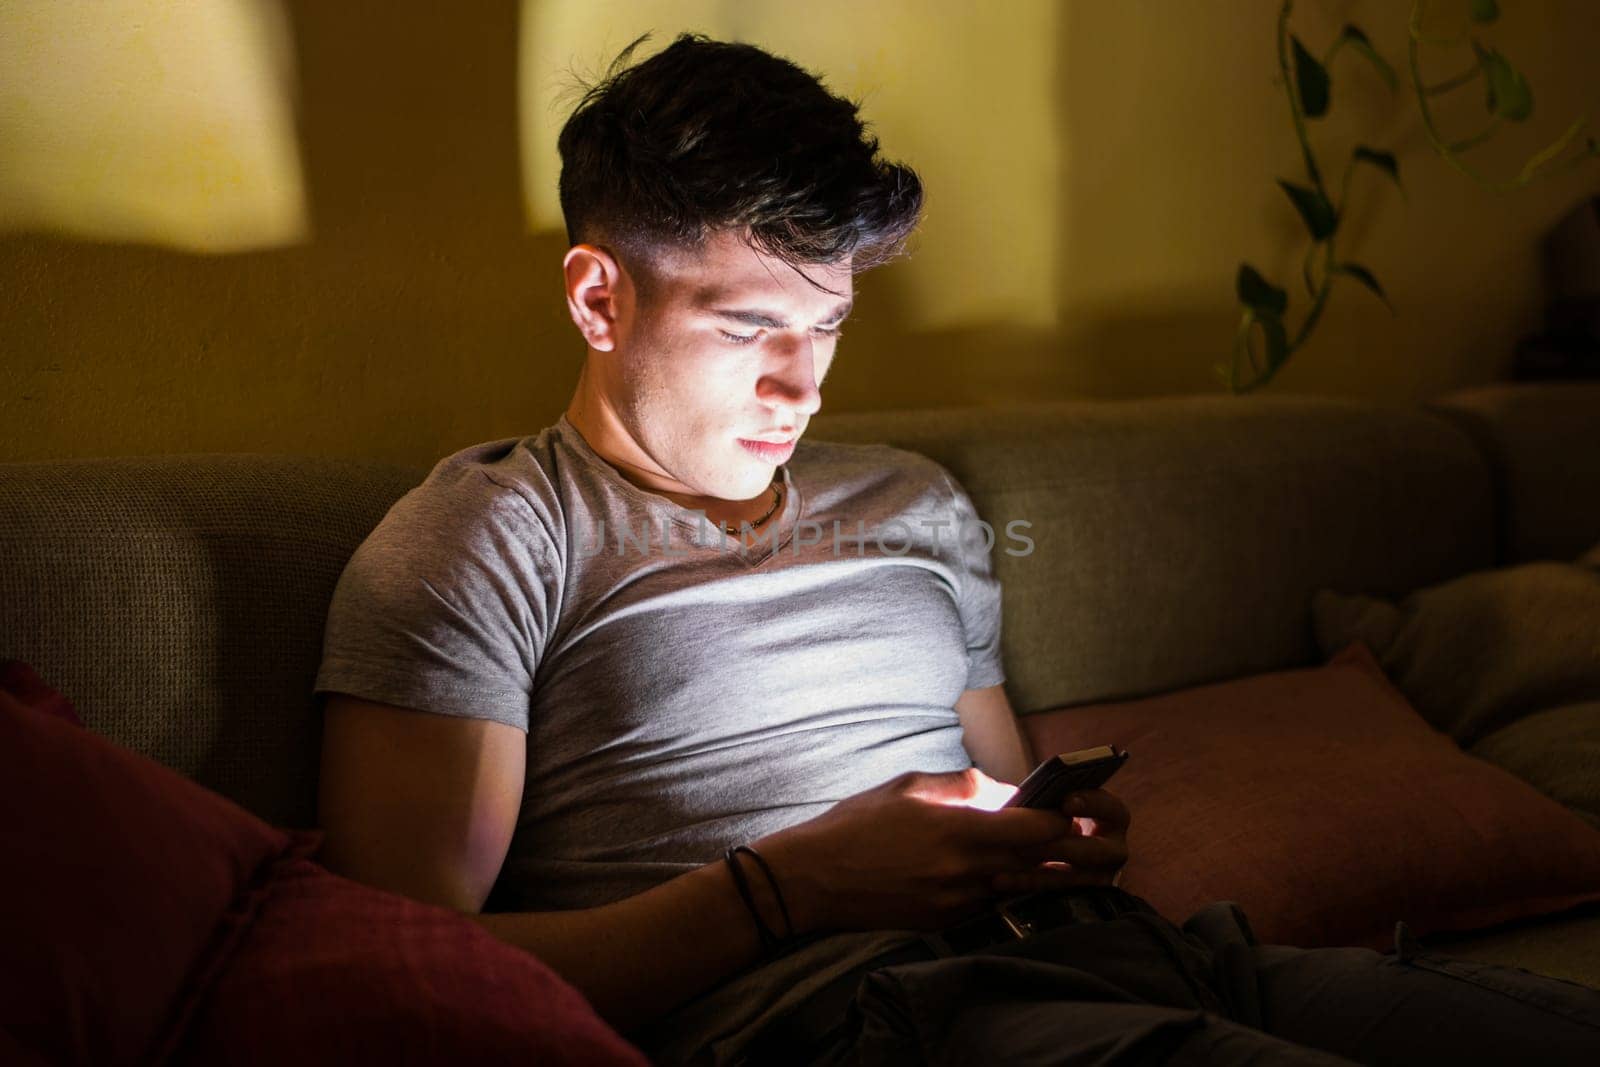 A man is seated on a couch, engrossed in his cell phone screen. He appears focused as he scrolls and interacts with the device, possibly texting or browsing. The background shows a typical living room setting.